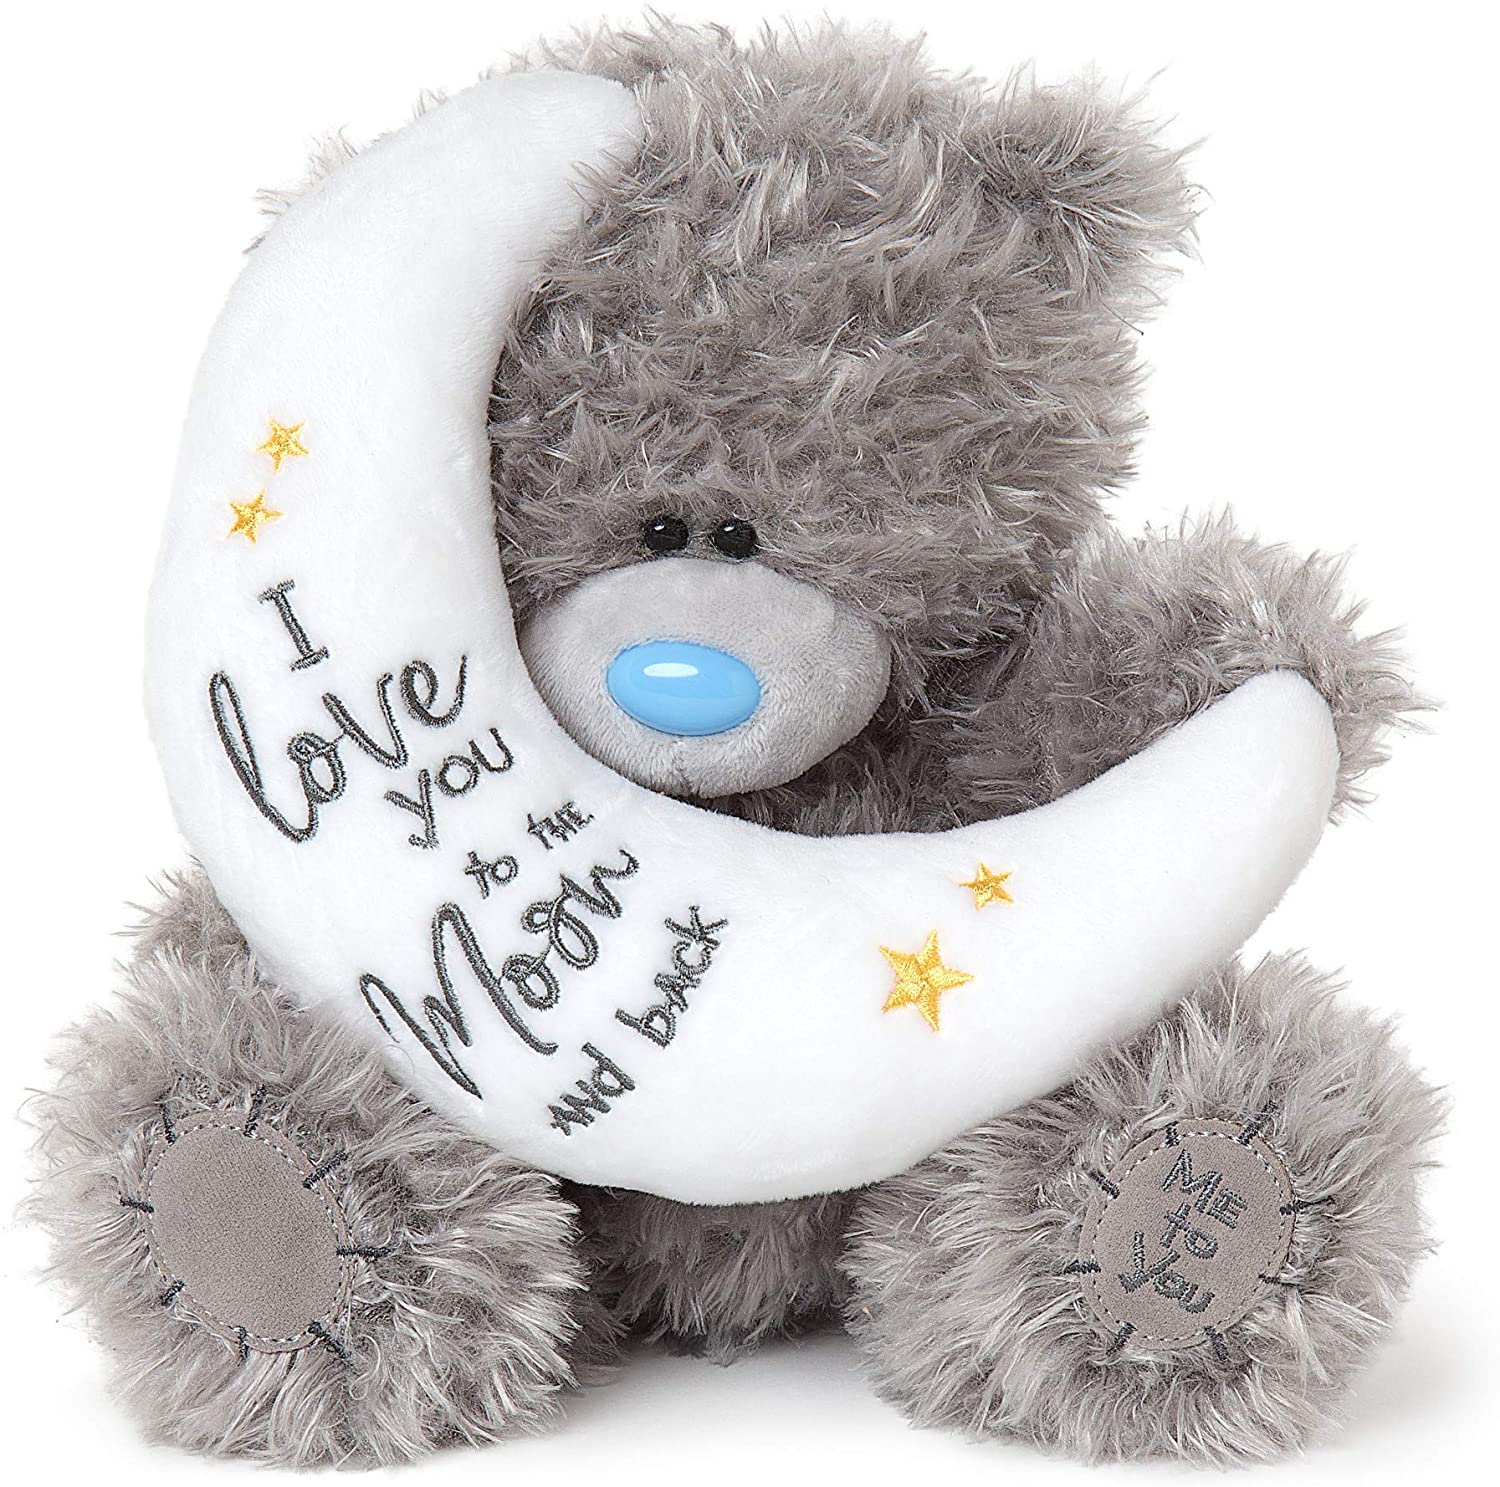 I Love You to the Moon & Back Soft Toy - Me to You Bear